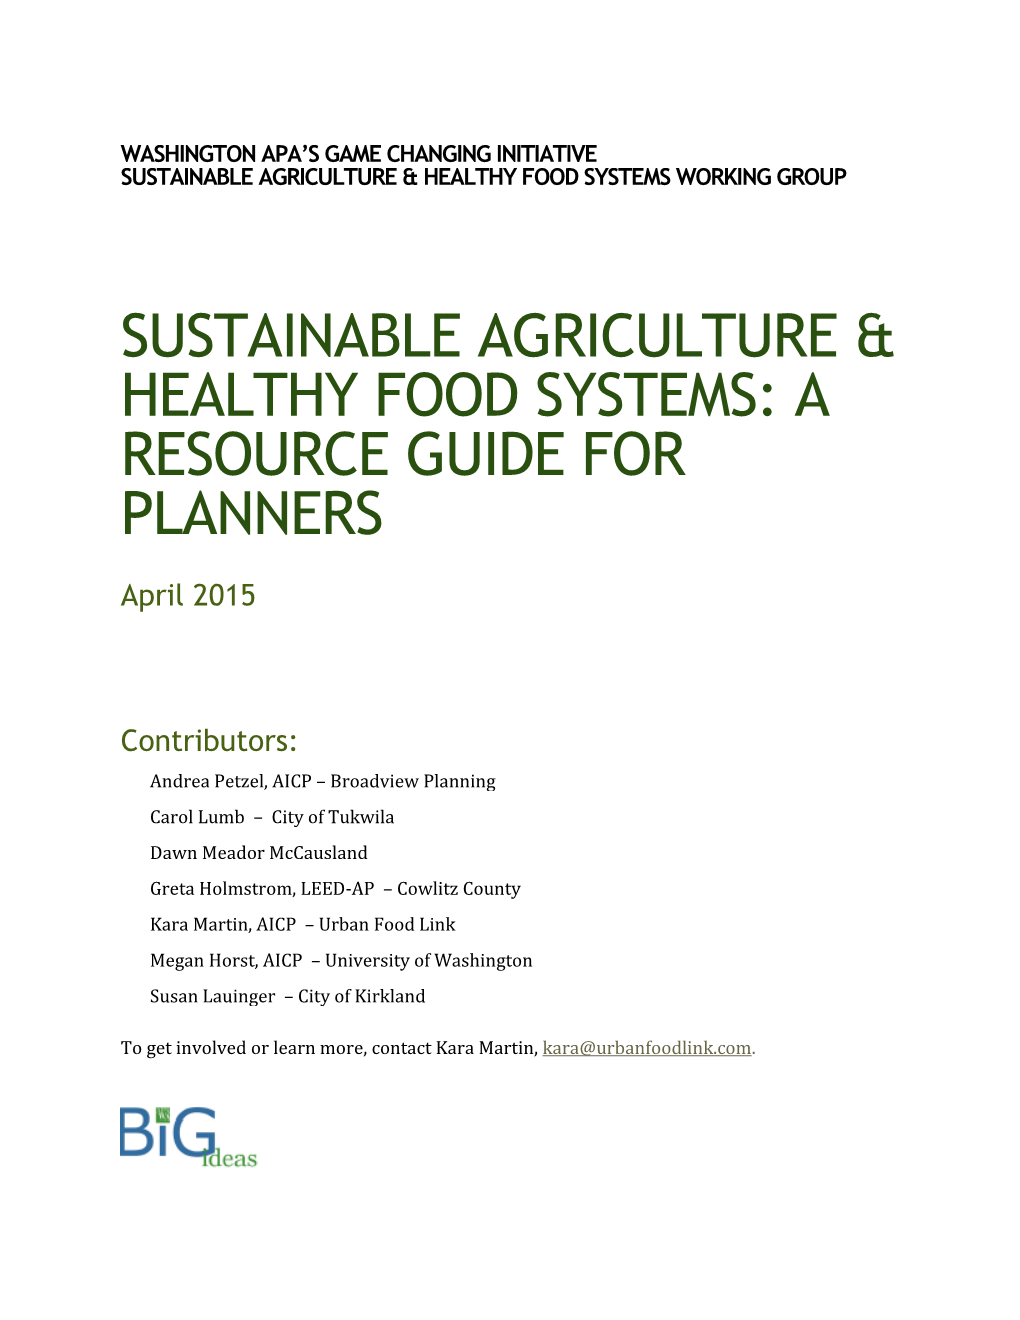 Sustainable Agriculture & Healthy Food Systems: a Resource Guide For